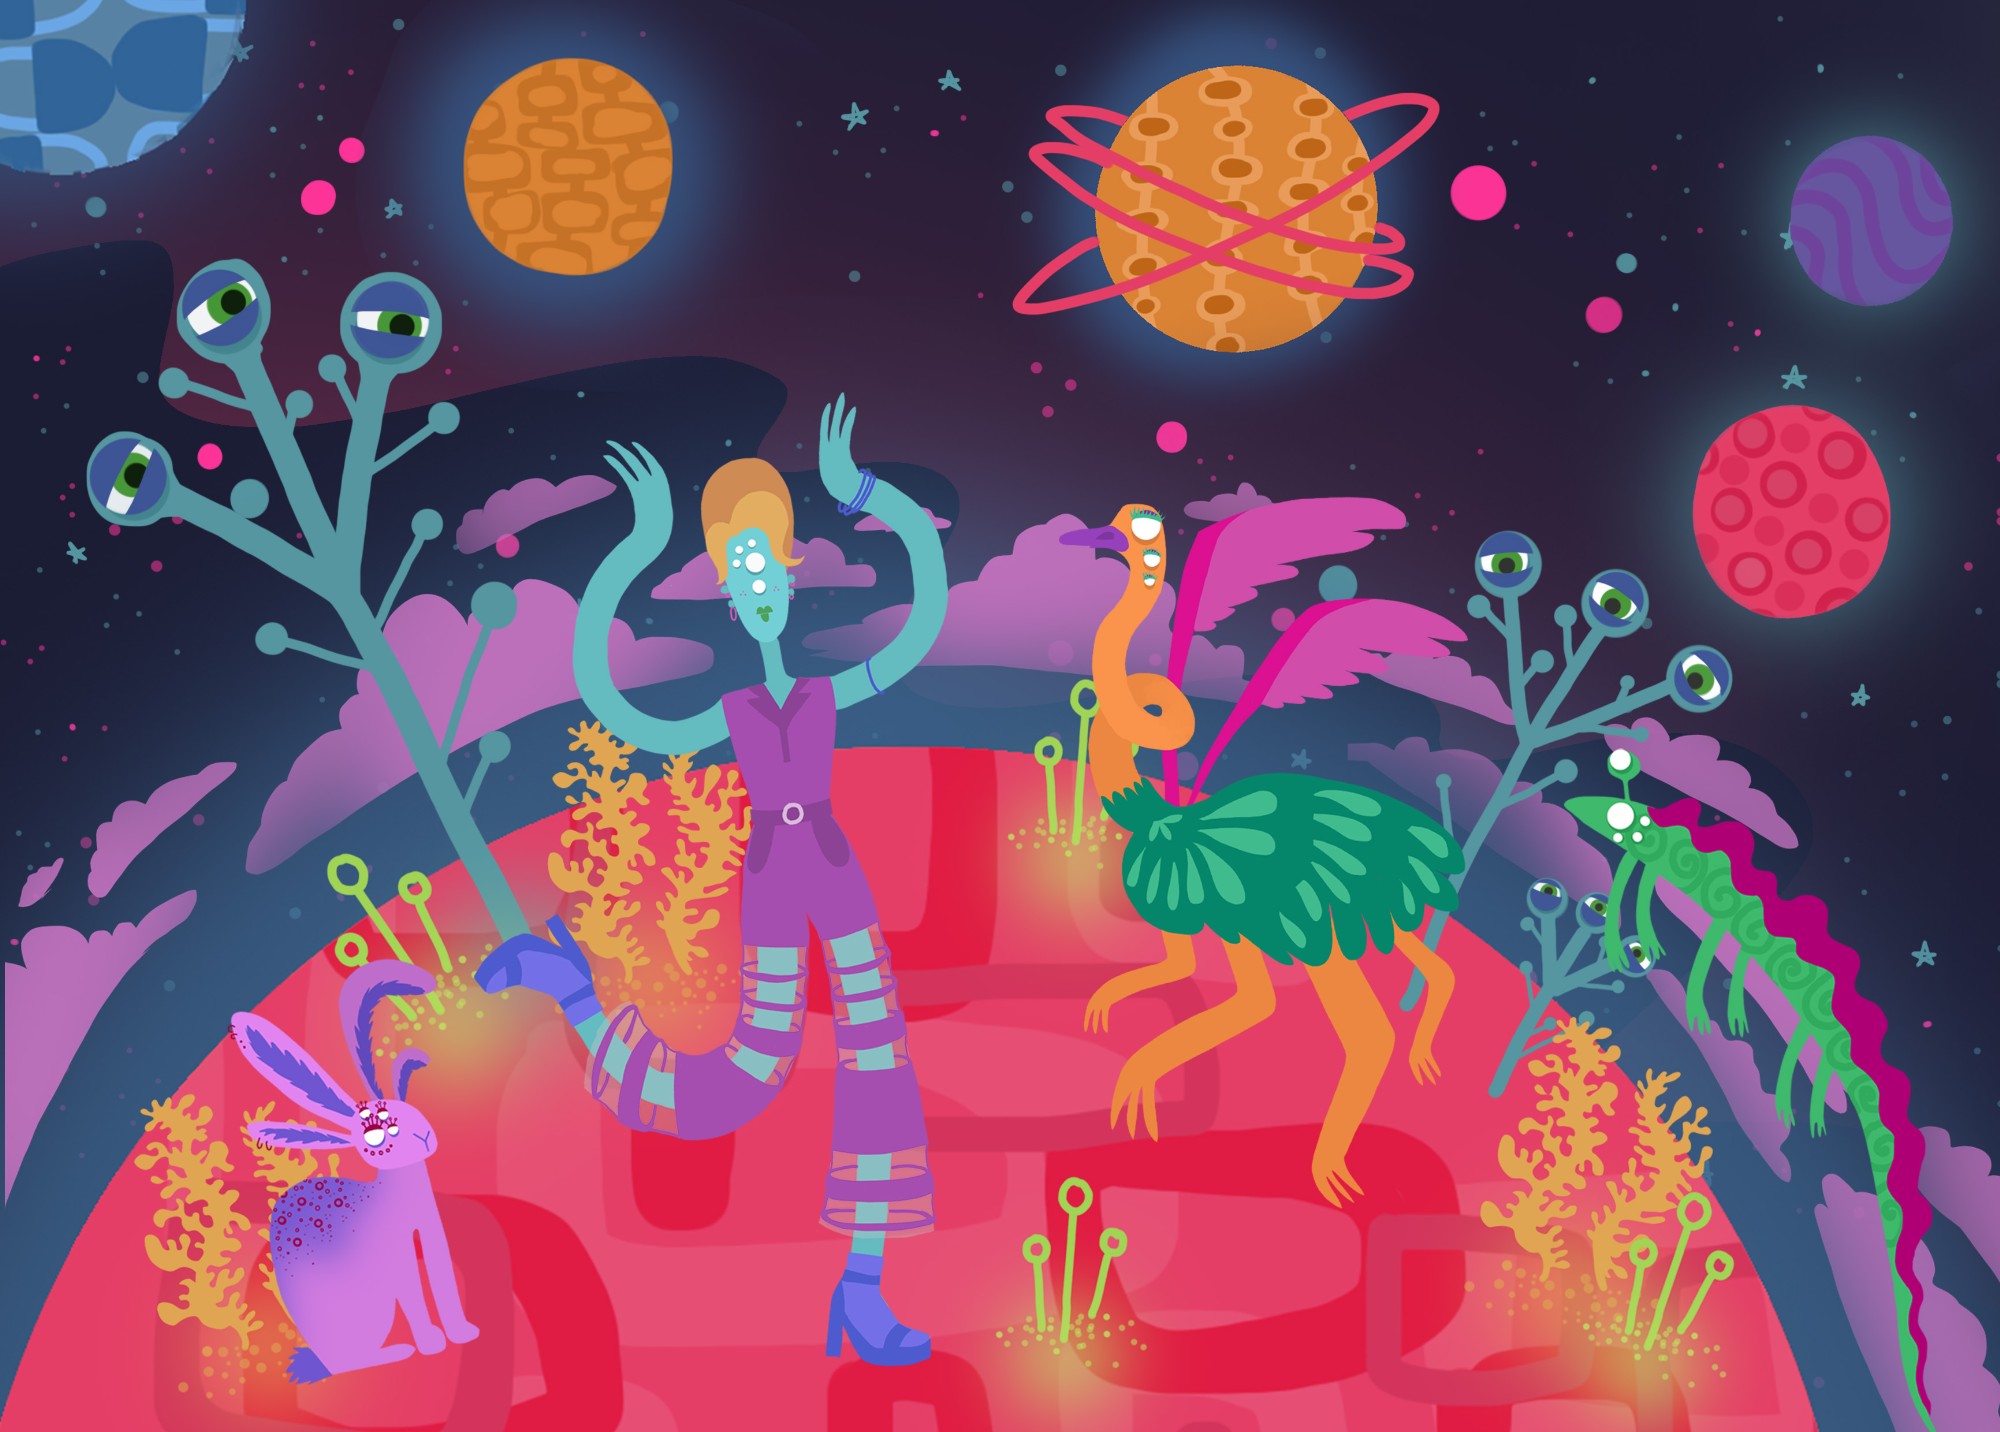 A segment from my leporello “The Colour Thieves”, set in space and based on the retro futurism of the 60’s and 70’s.